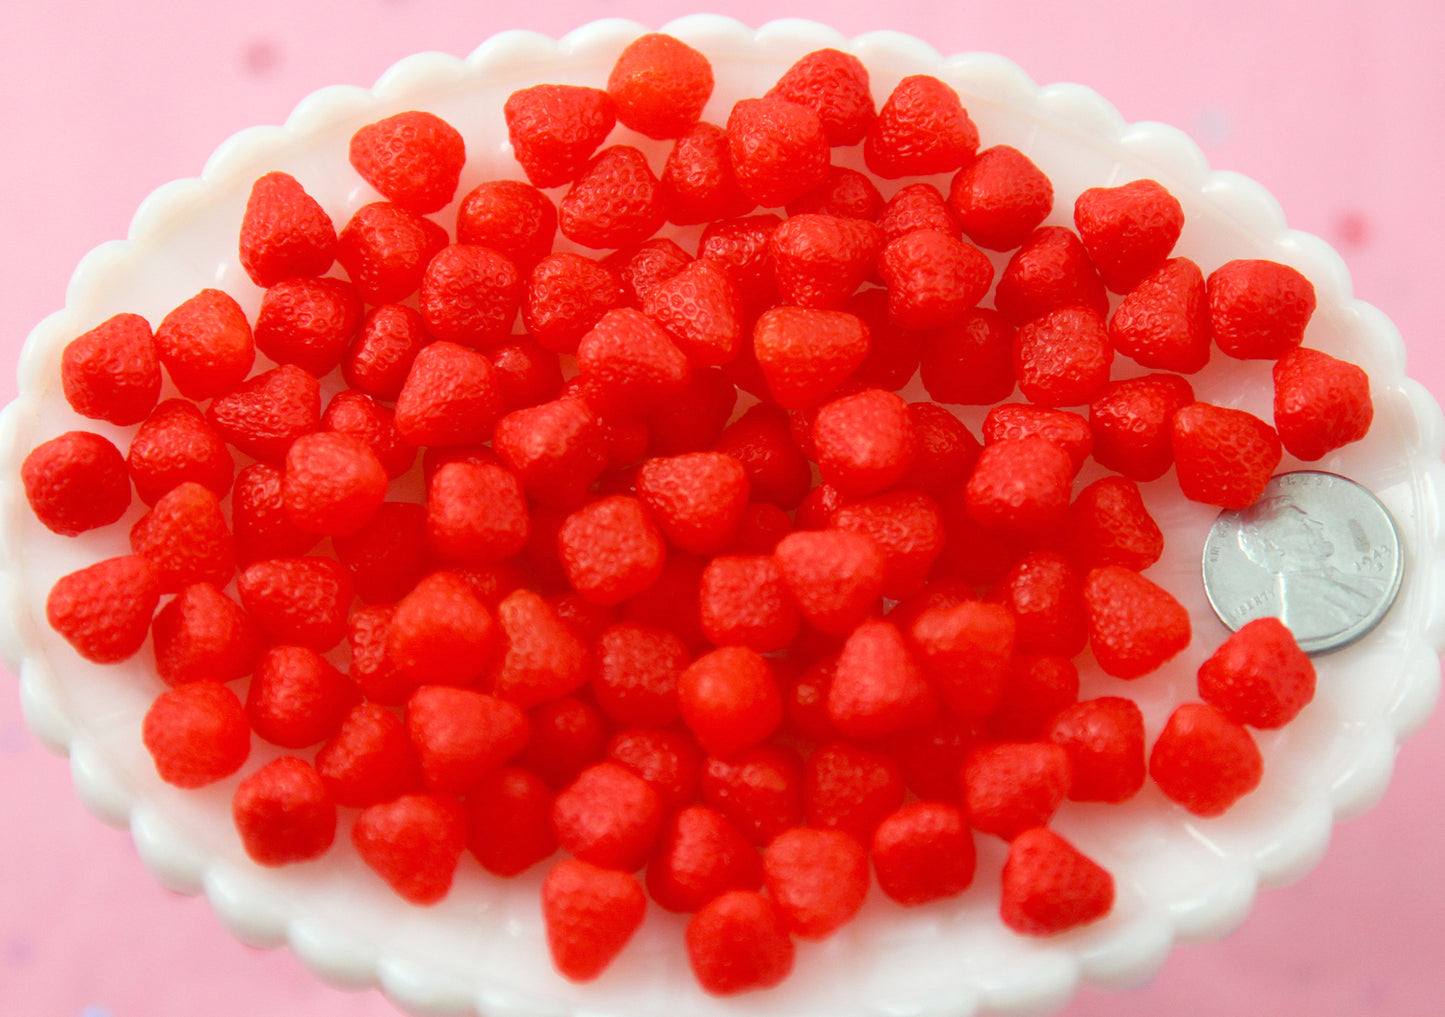 Fake Strawberries - 10mm Fake Strawberry Chunks Soft Squishy Silicone Berry Pieces or Resin Cabochons - 12 pc set